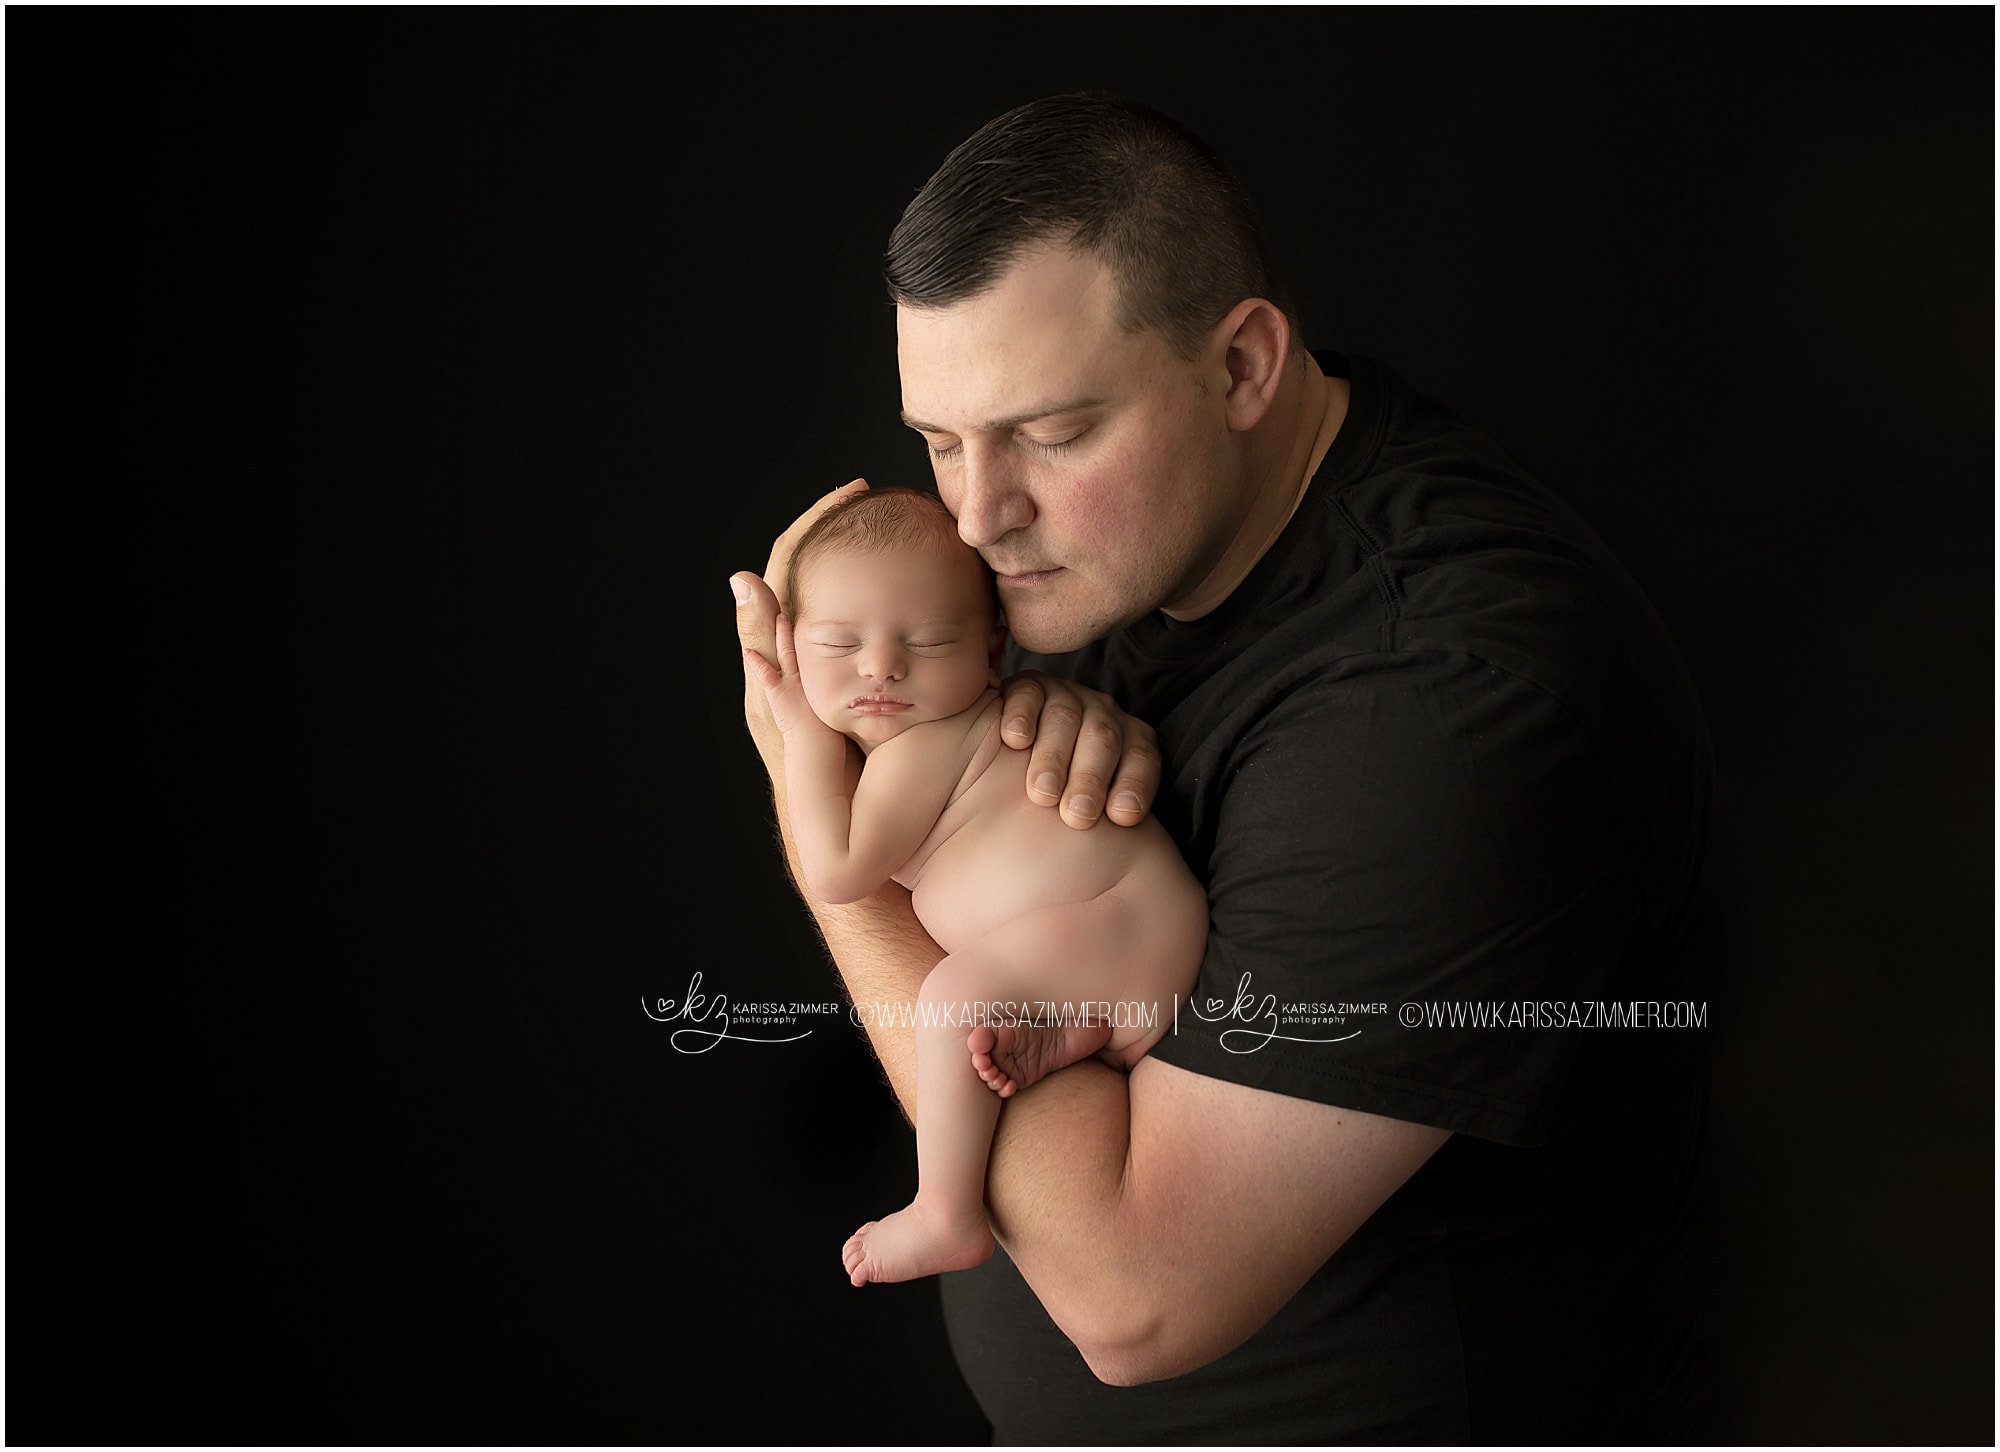 A new father cradles his newborn baby during photography session at camp hill studio